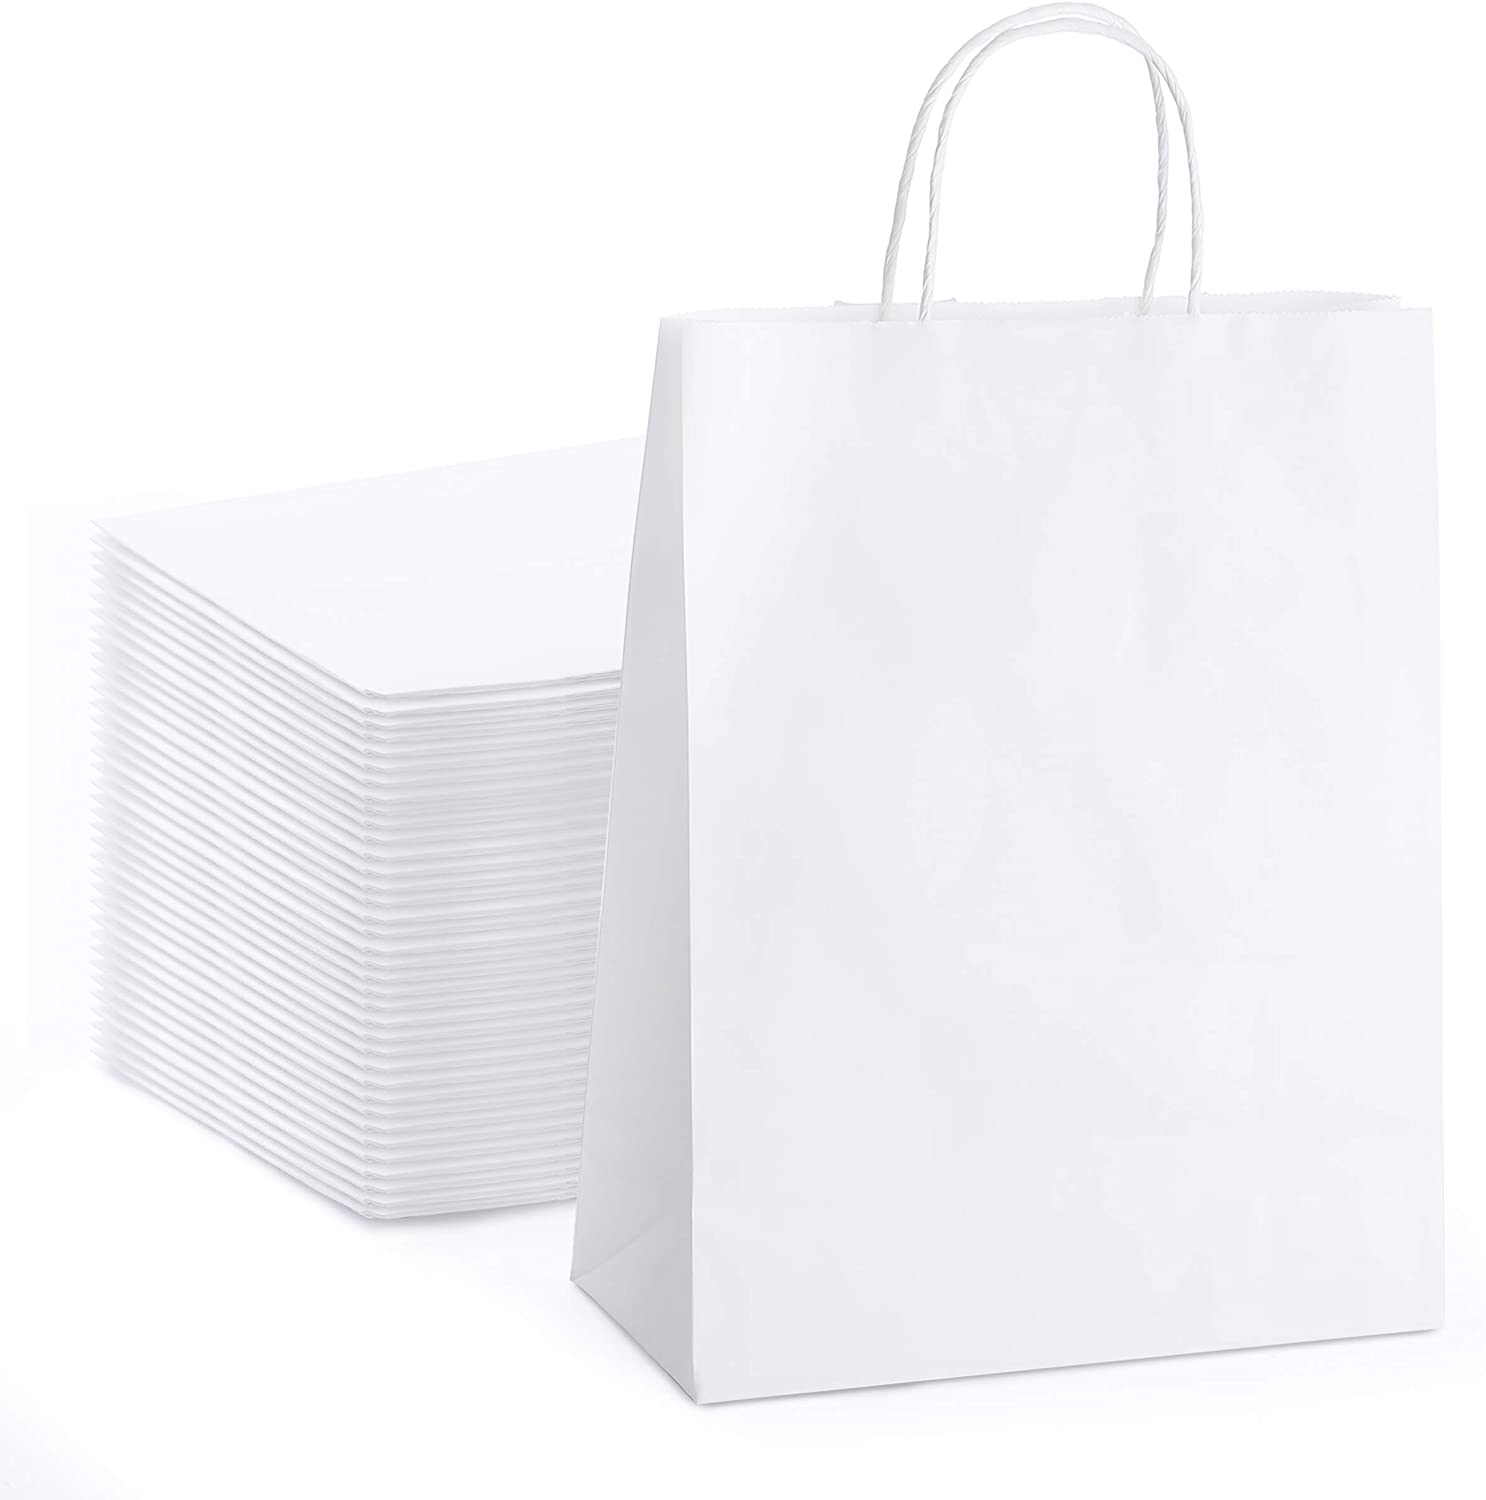 18"x25"x8" - White Twisted Handle Paper Bags